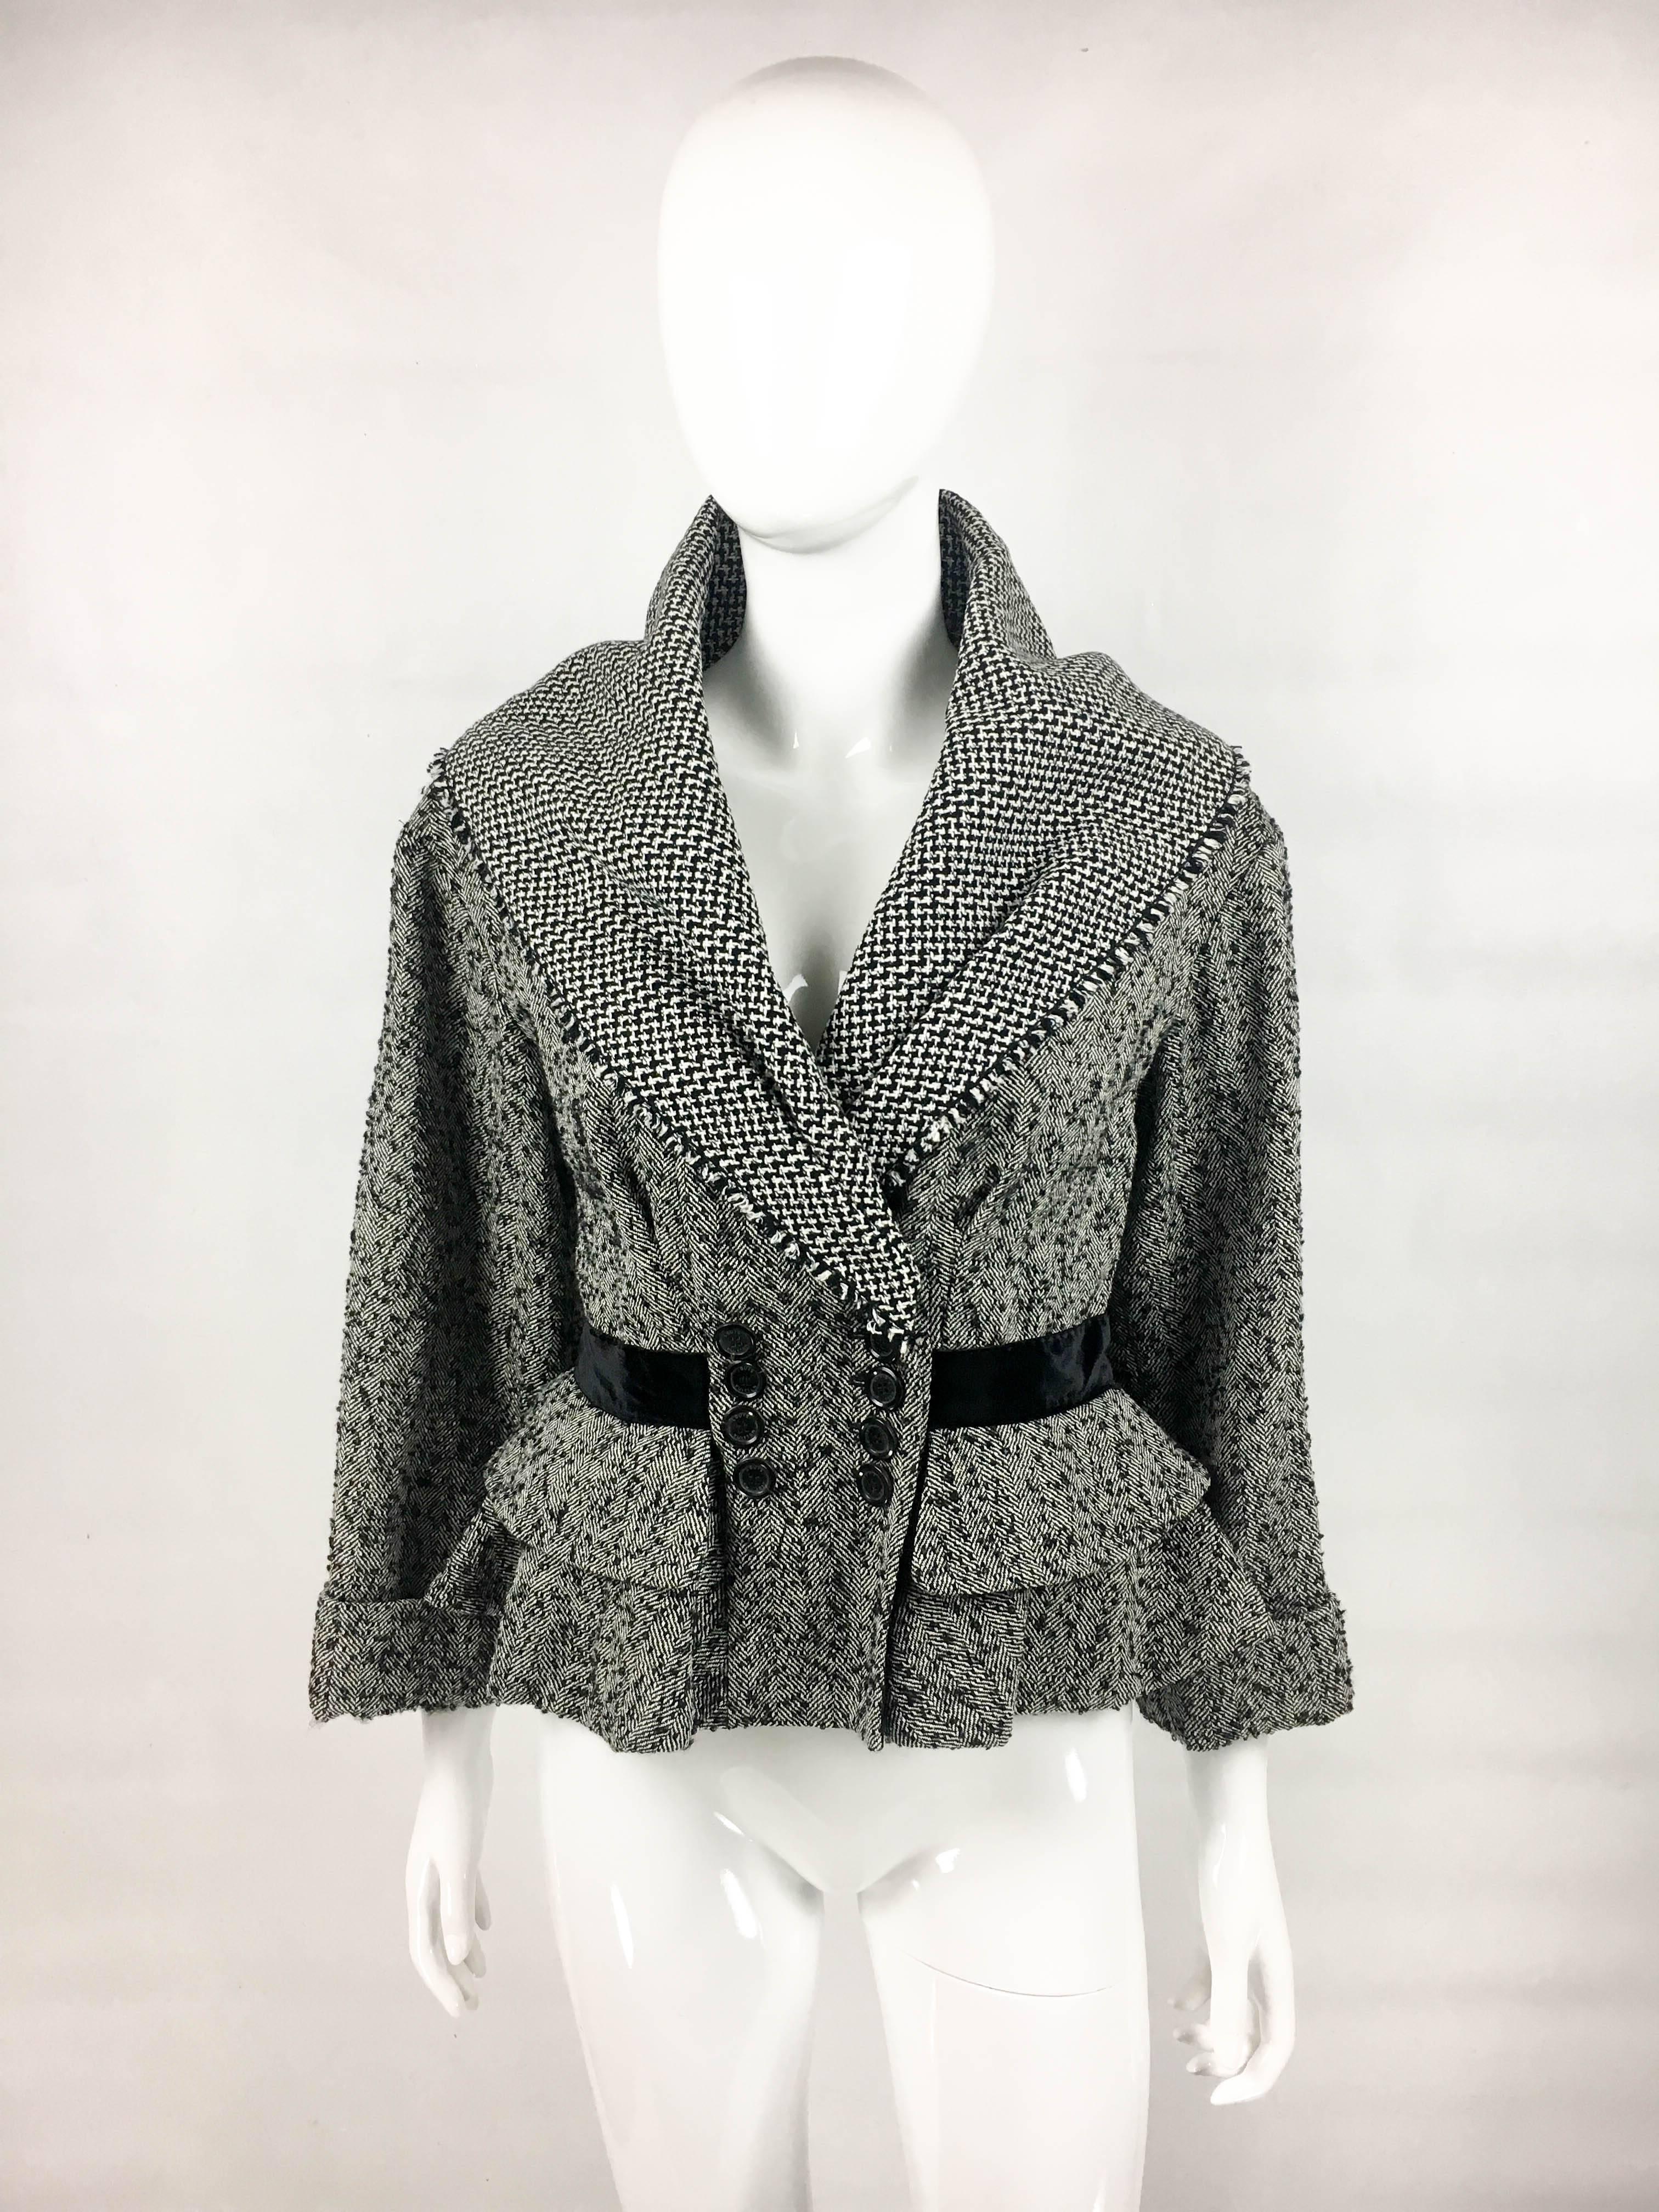 Louis Vuitton Black and White Tweed Jacket With Dramatic Collar - 21st Century In Excellent Condition In London, Chelsea